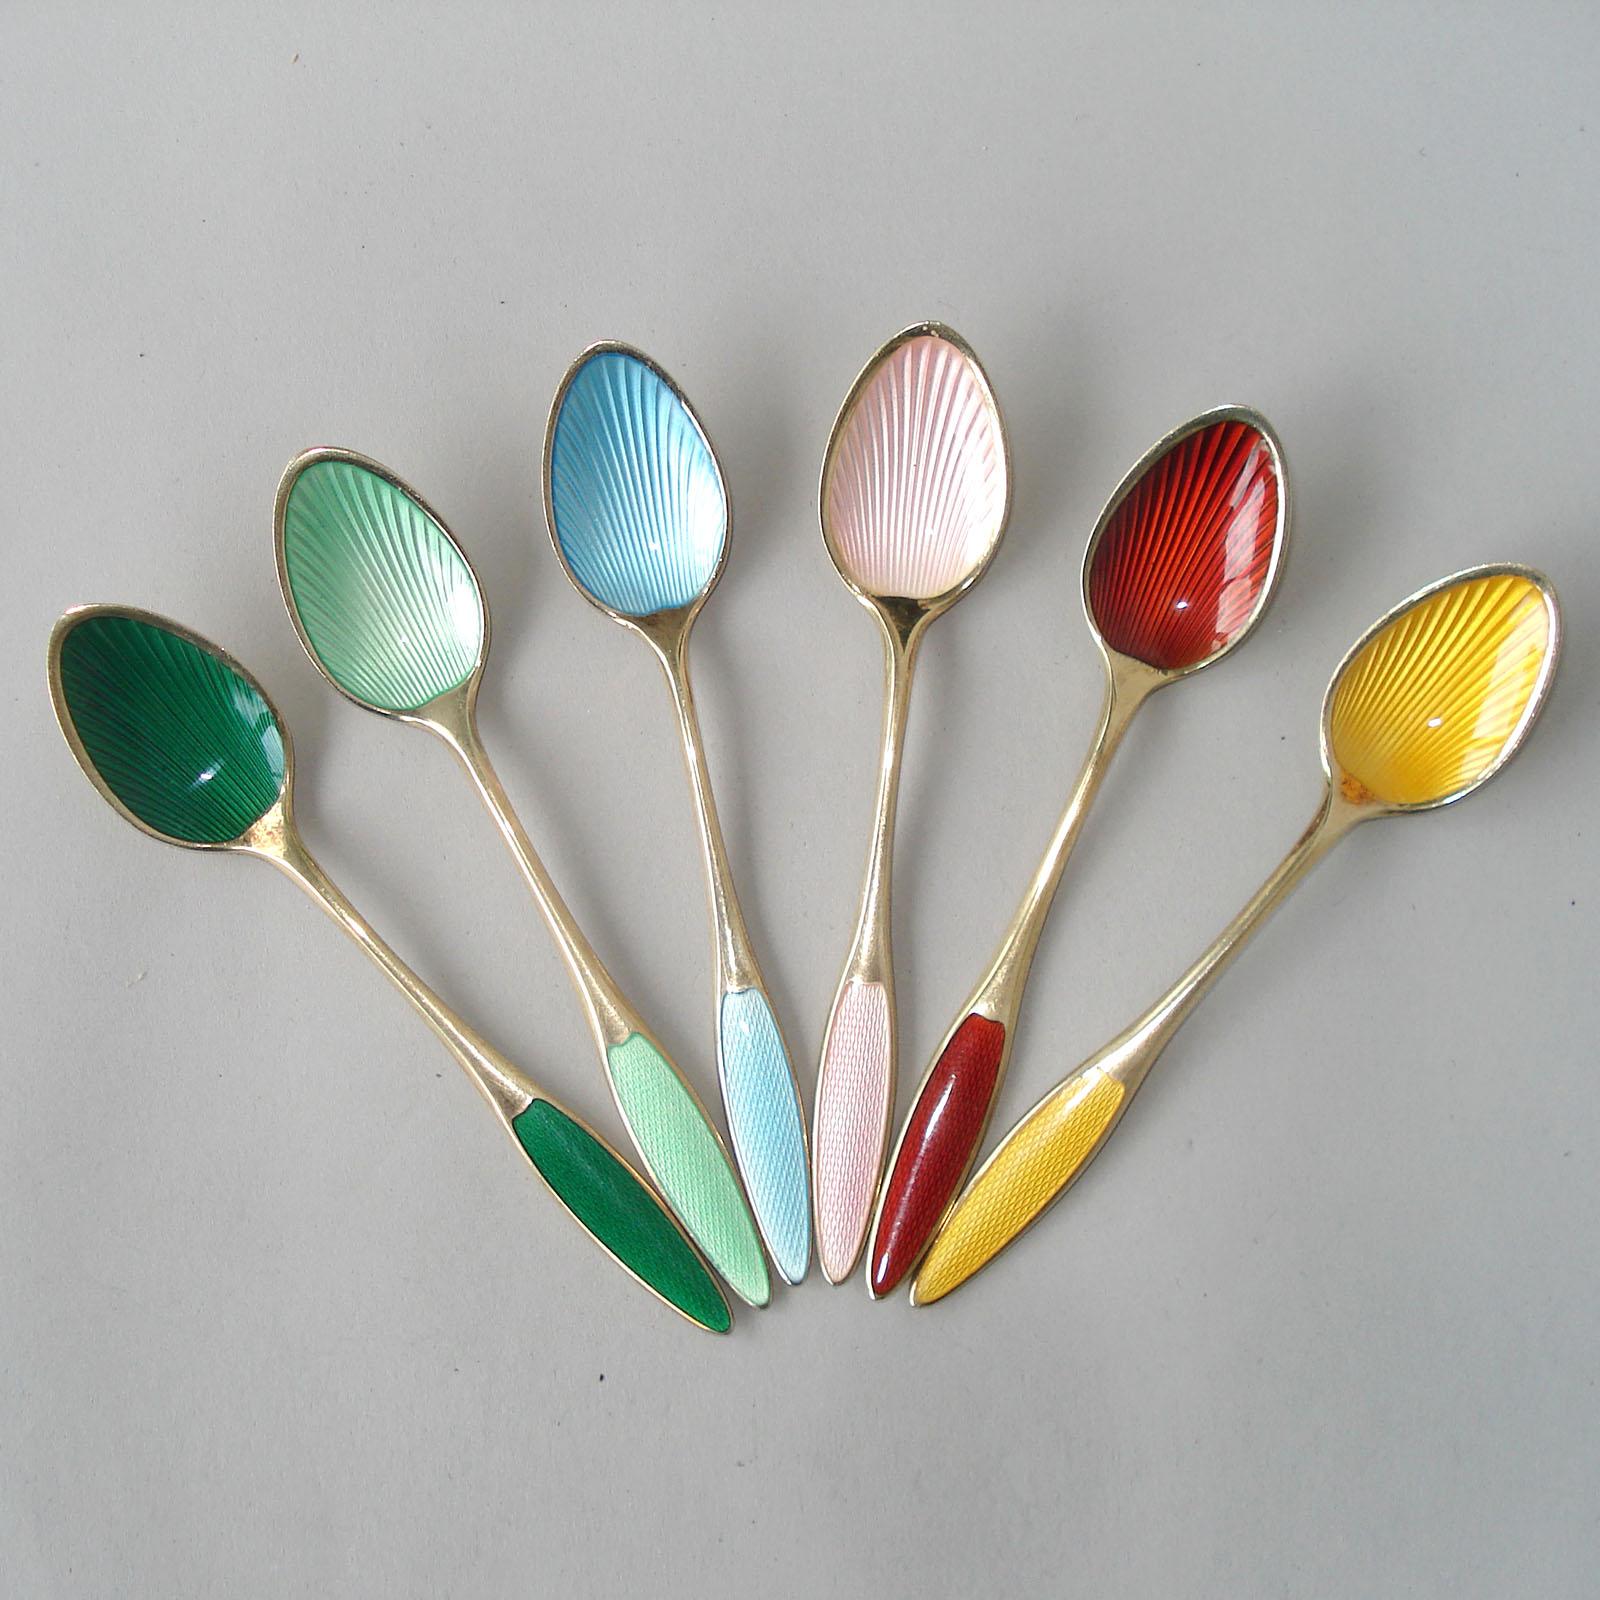 Set of six Danish spoons in gilt sterling silver with polychrome enamel in green, light green, light blue, pink, yellow, and red, circa 1930. Each hallmarked 